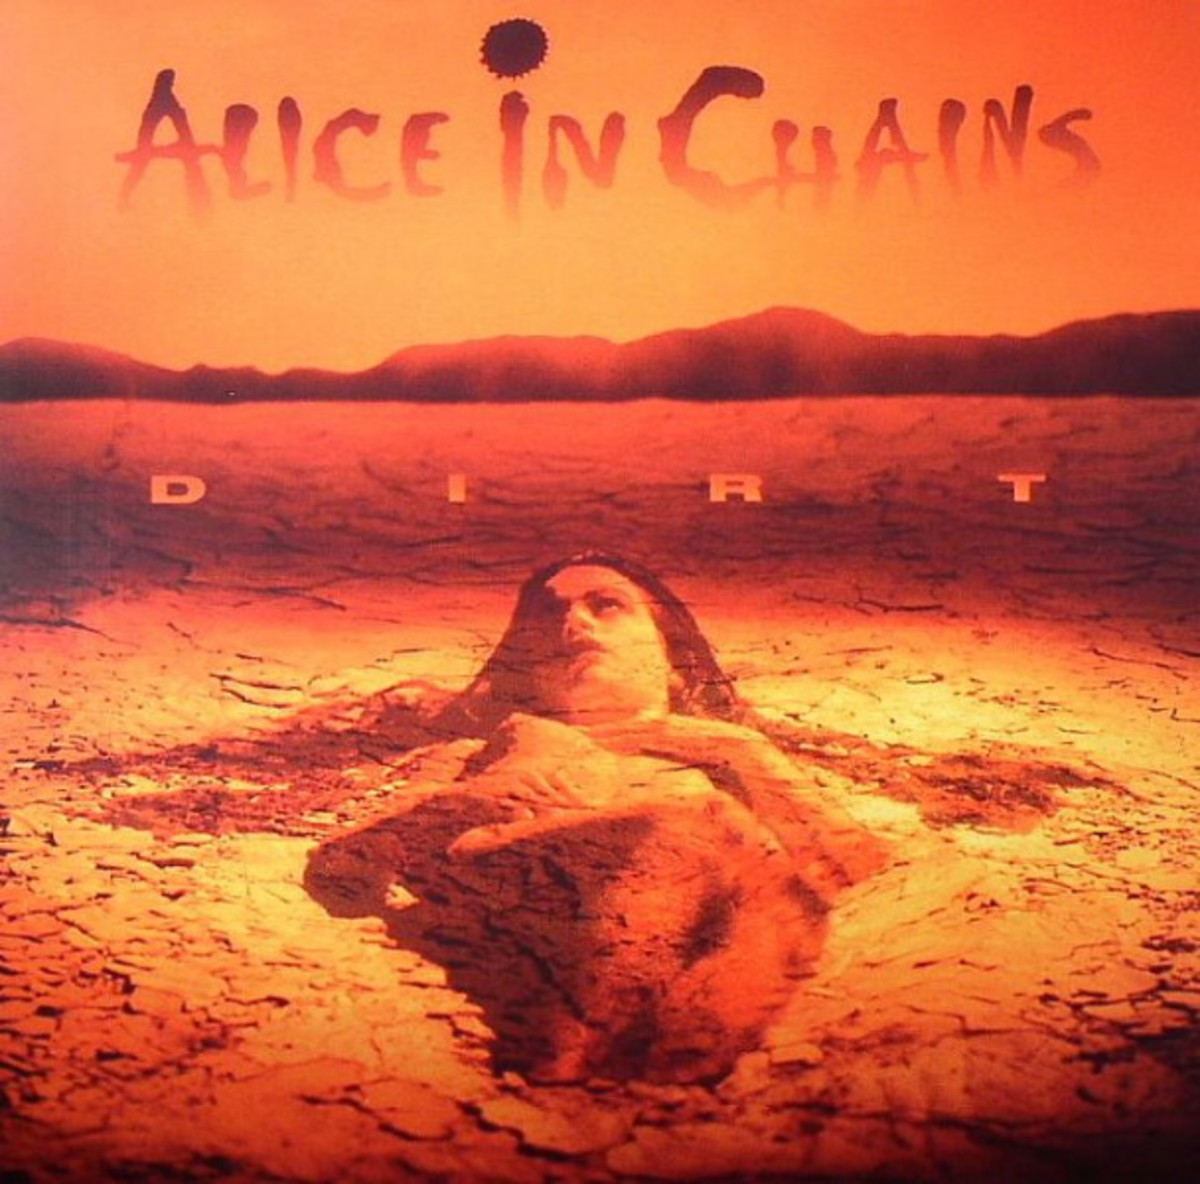 "Dirt" by Alice In Chains